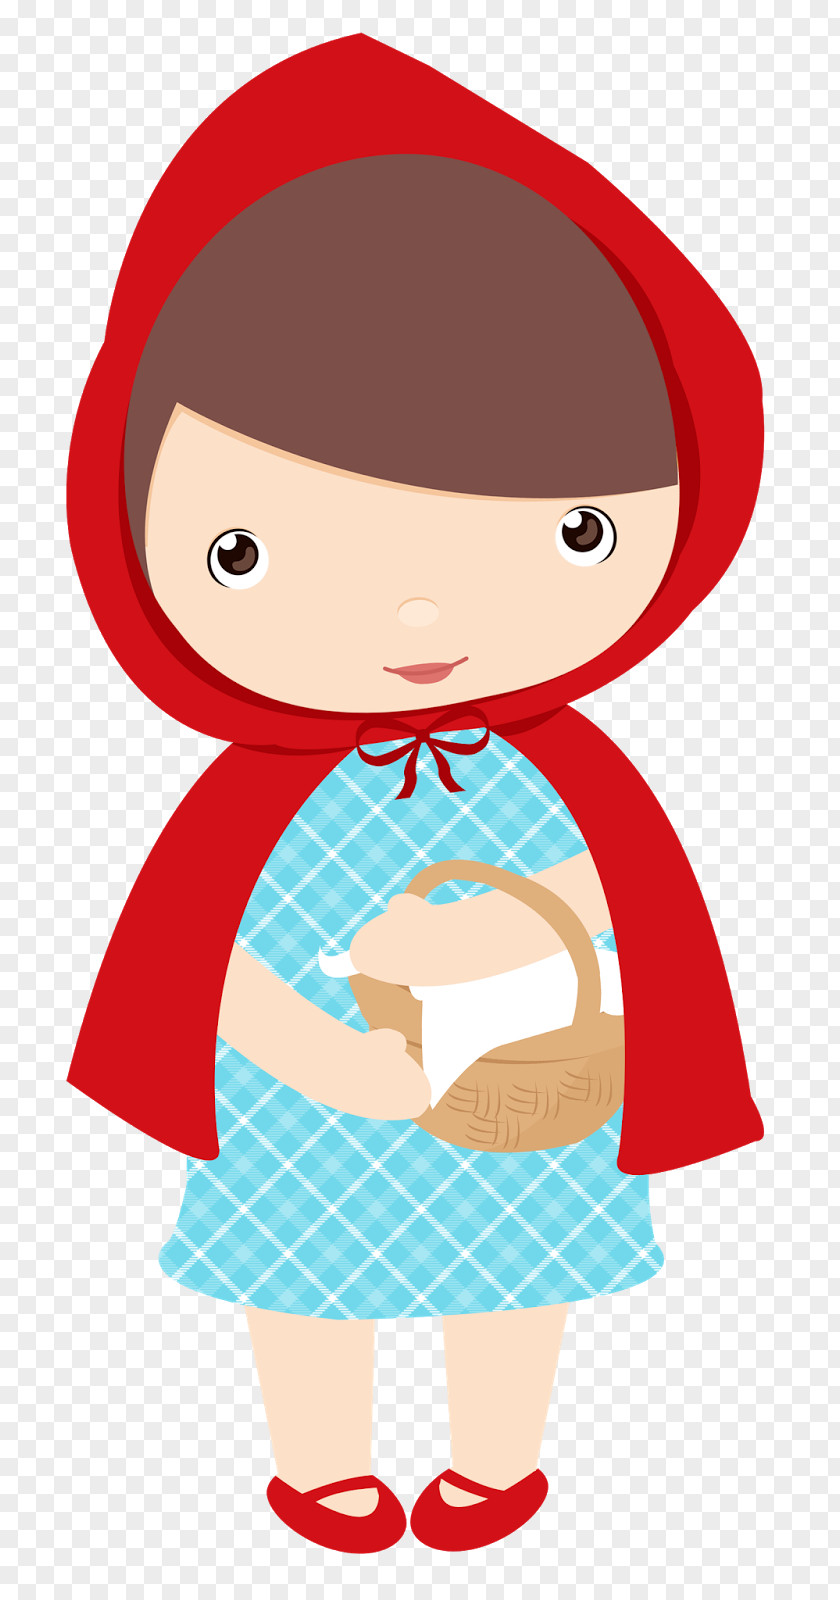 Youtube Little Red Riding Hood Big Bad Wolf YouTube Clip Art PNG